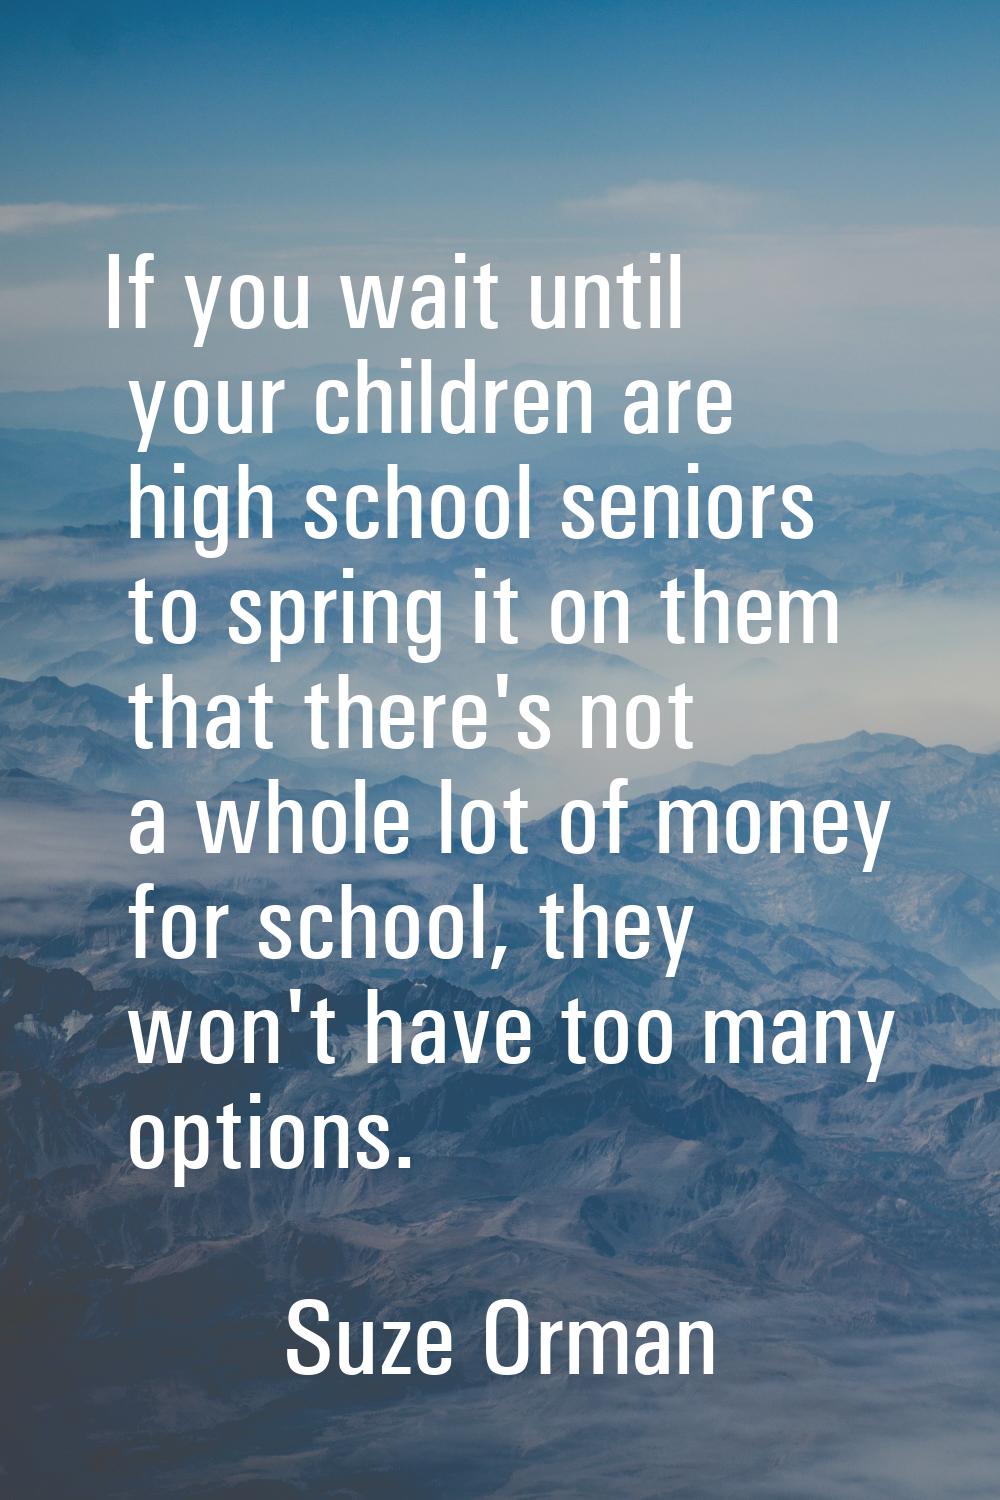 If you wait until your children are high school seniors to spring it on them that there's not a who